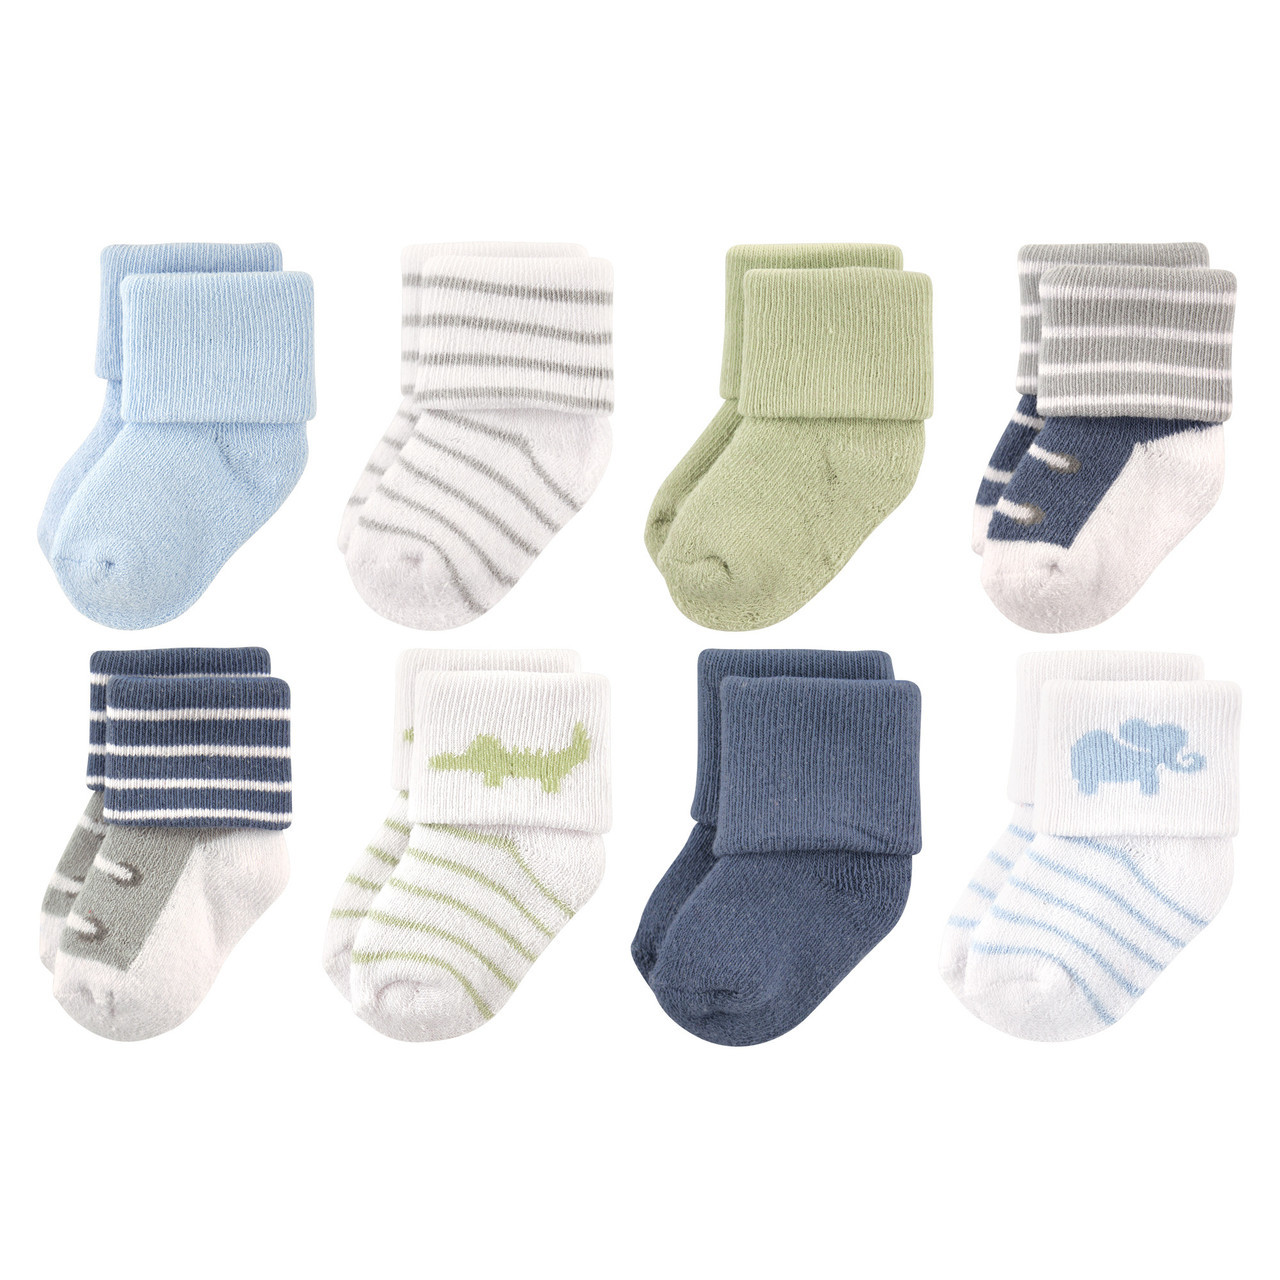 Luvable Friends Socks, 8-Pack, Safari | Baby and Toddler Clothes ...